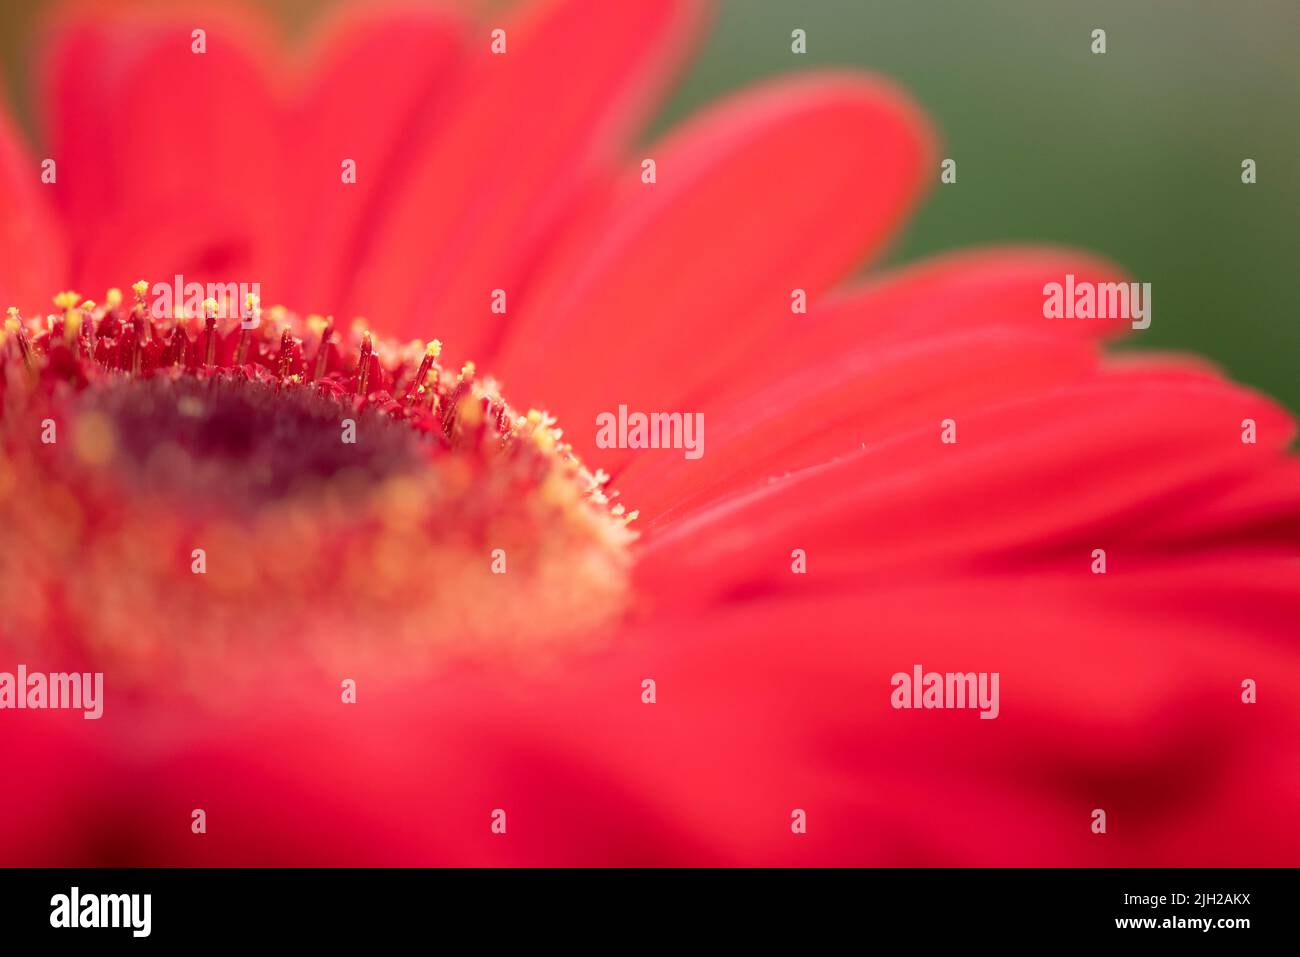 Gerbera Transvaal daisy Red Color flower Used in flower decorations. Stock Photo